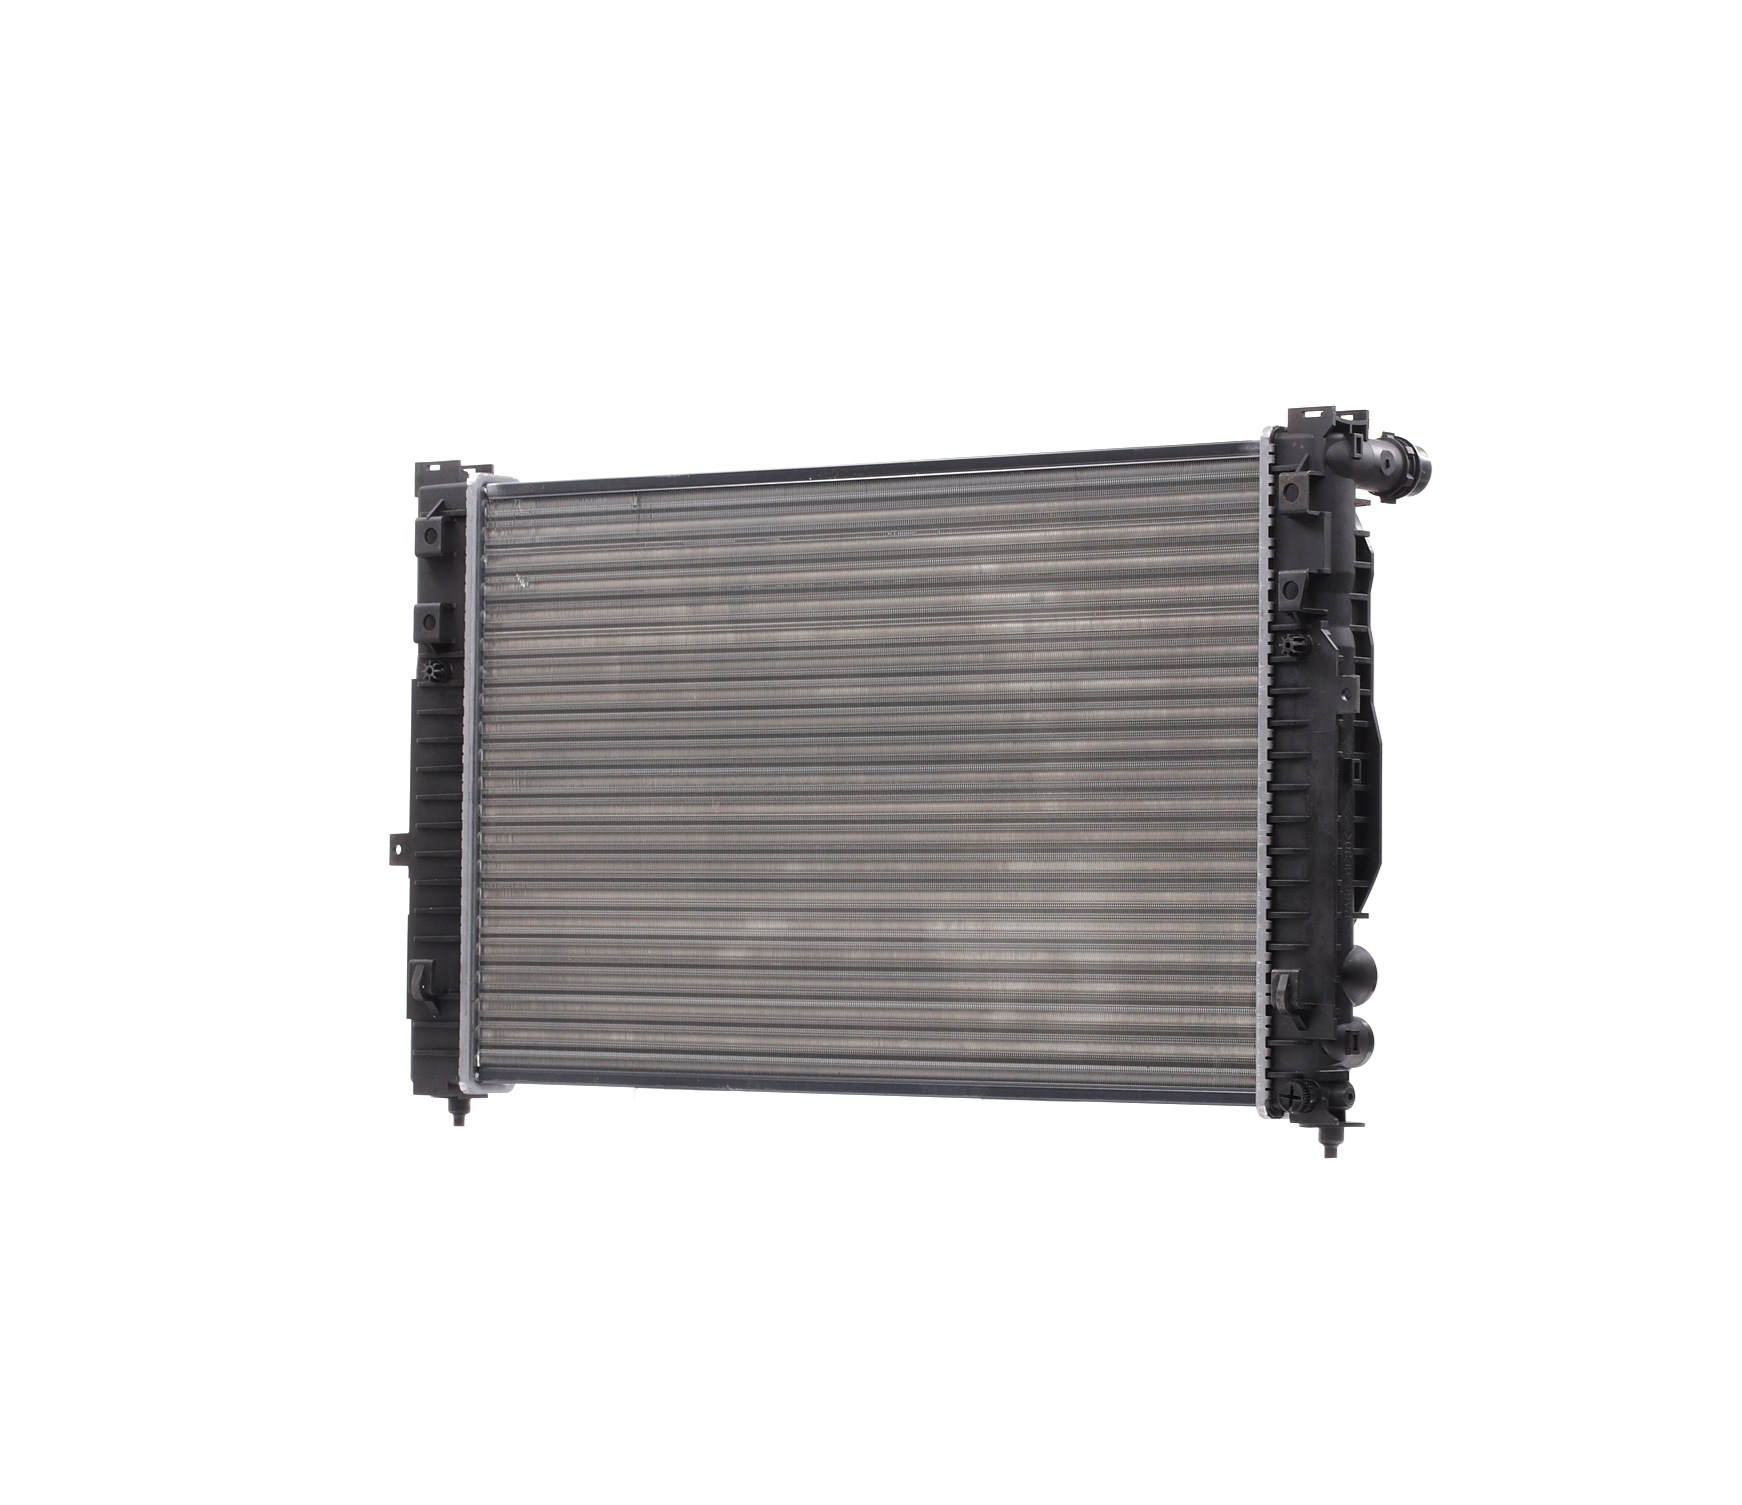 STARK SKRD-0120227 Engine radiator Aluminium, Plastic, for vehicles with/without air conditioning, Automatic Transmission, Mechanically jointed cooling fins